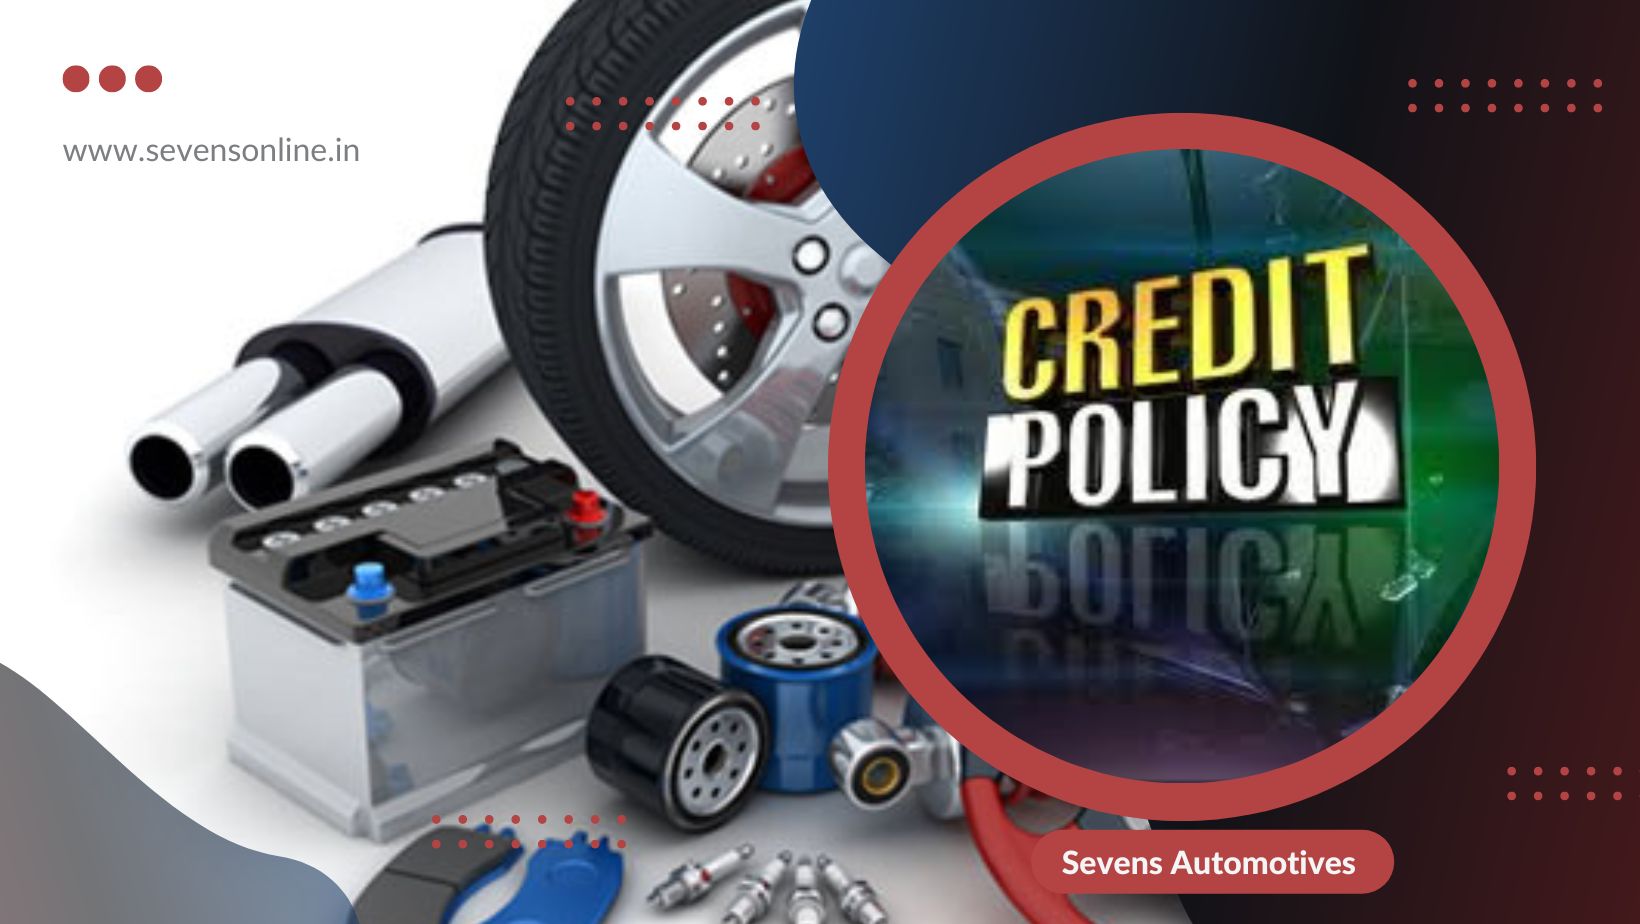 How accurate is an aftermarket credit policy